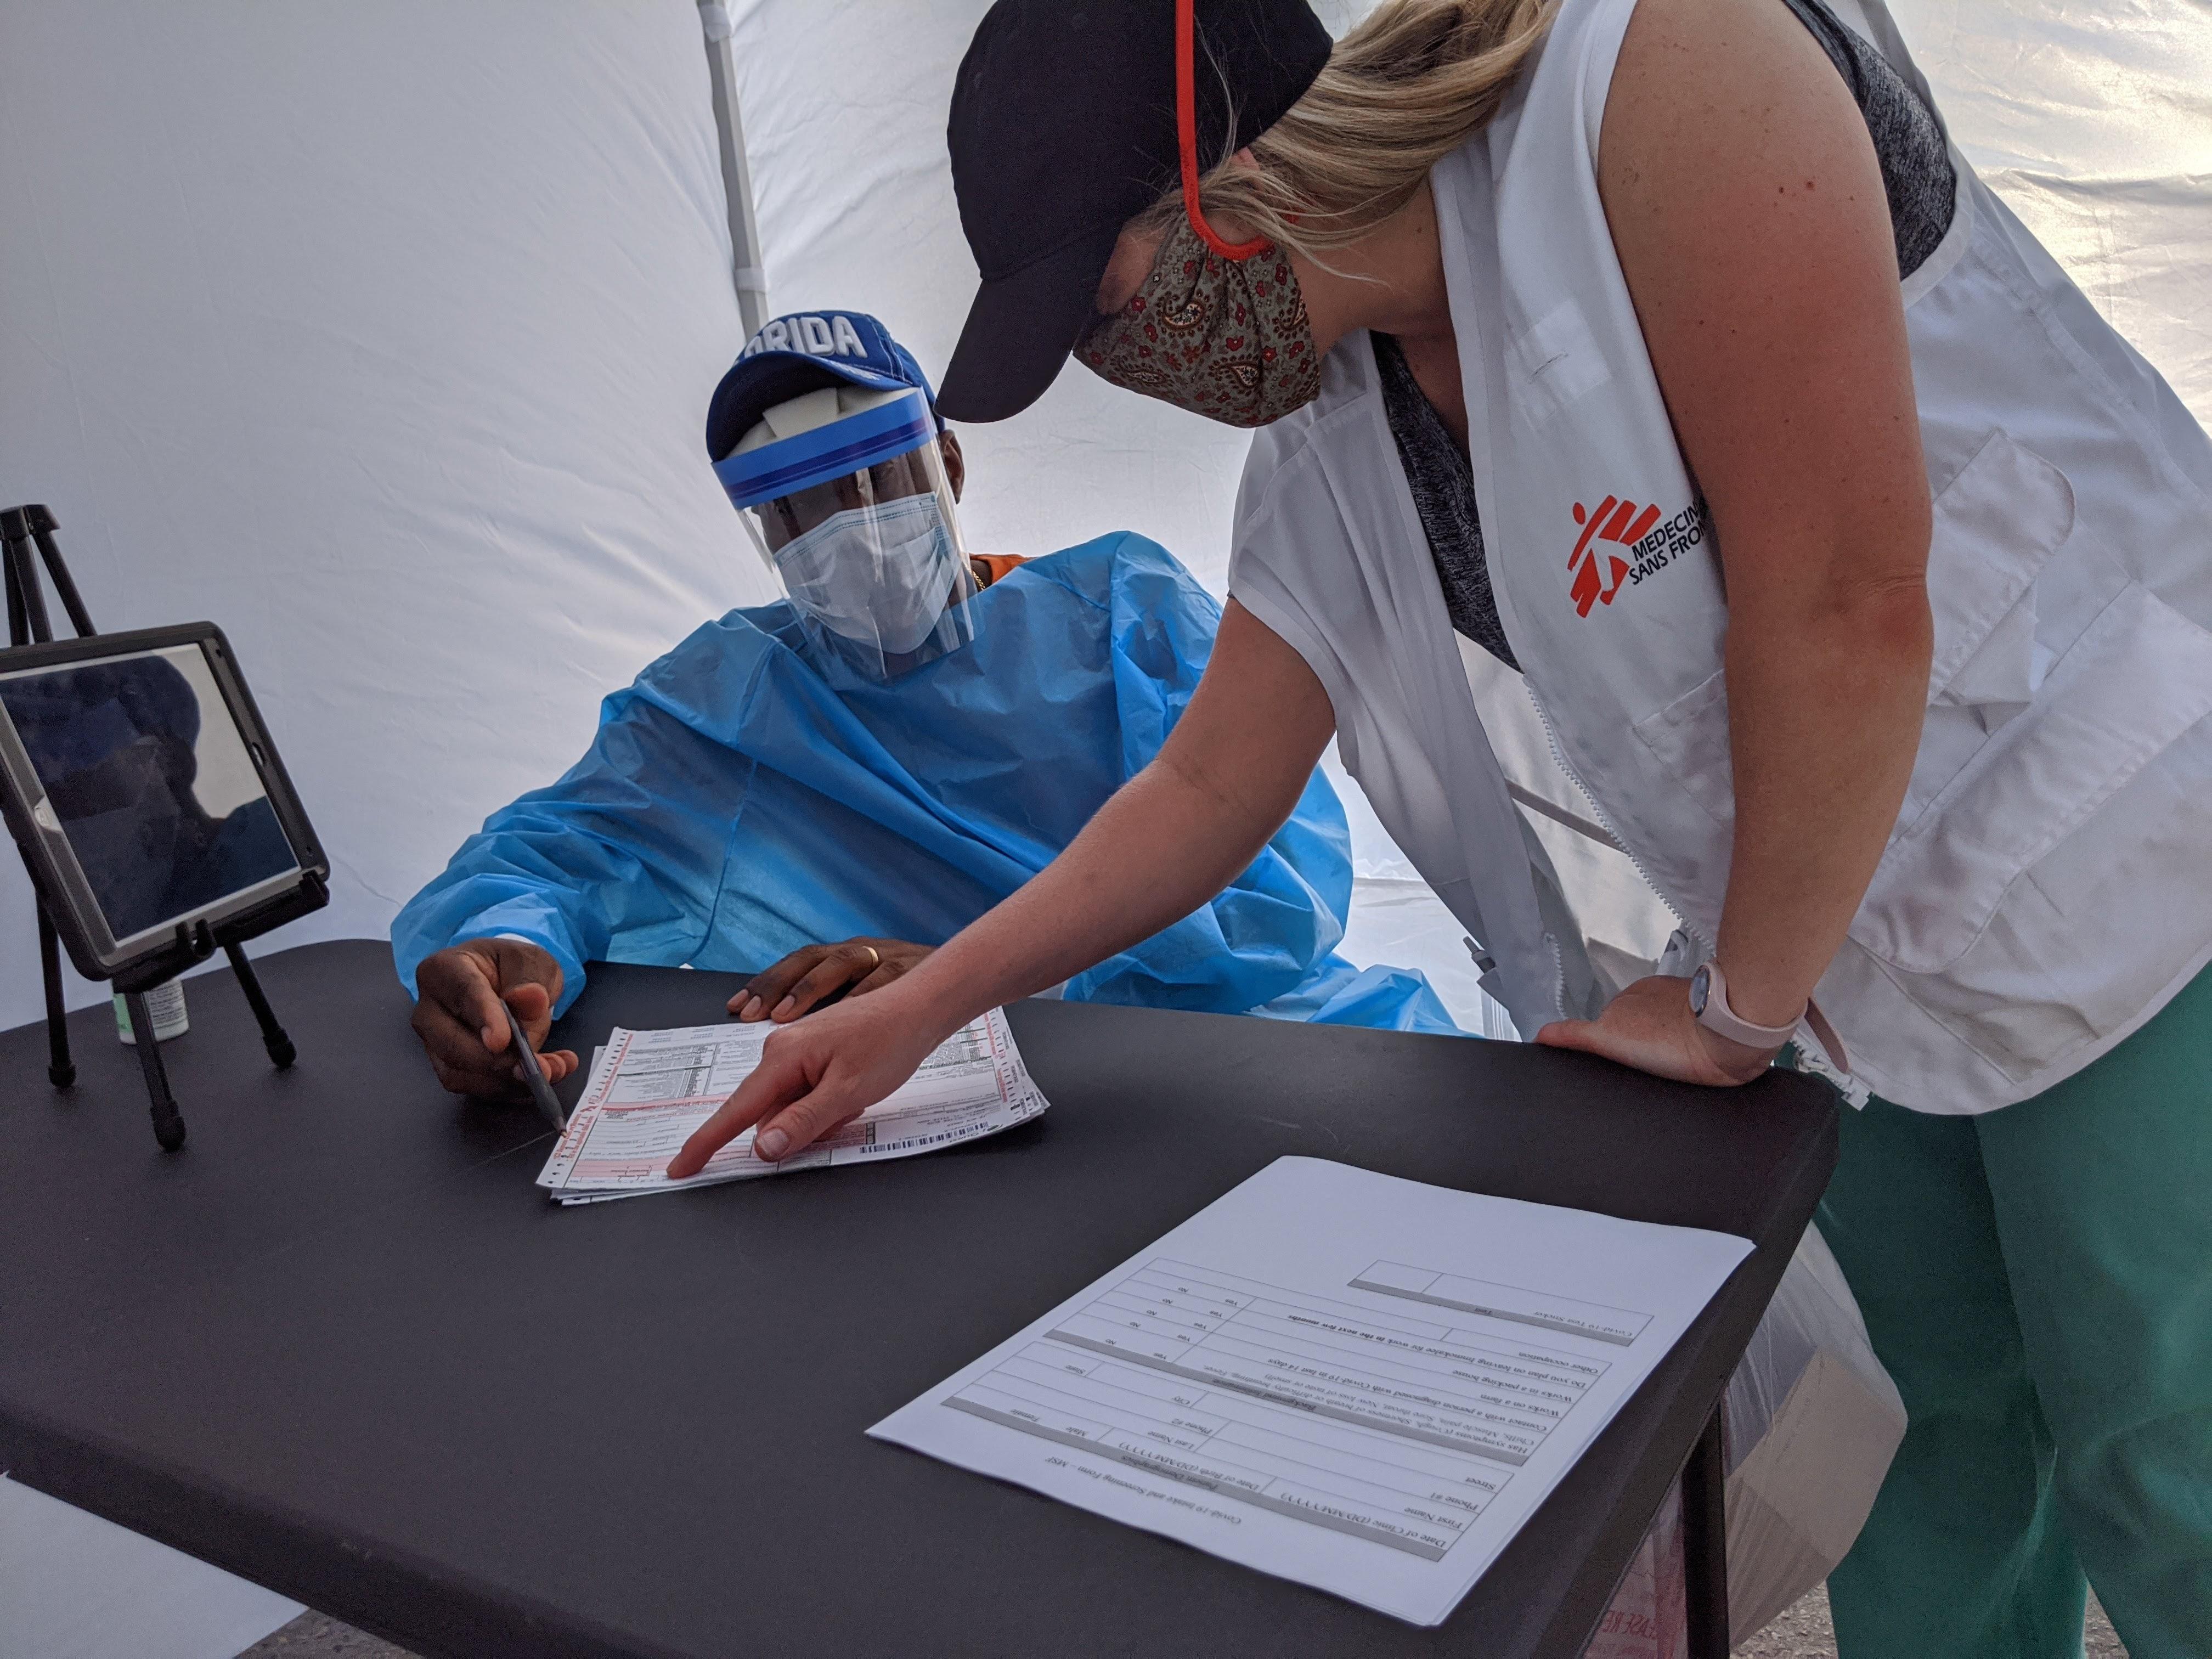 Doctors Without Borders(MSF) team members set up one of the private medical consultation kiosks at a mobile testing and health clinic in Immokalee, Florida, designed to address some of the unmet health needs of the large community of migrant farmworkers in the area during the COVID-19 outbreak.